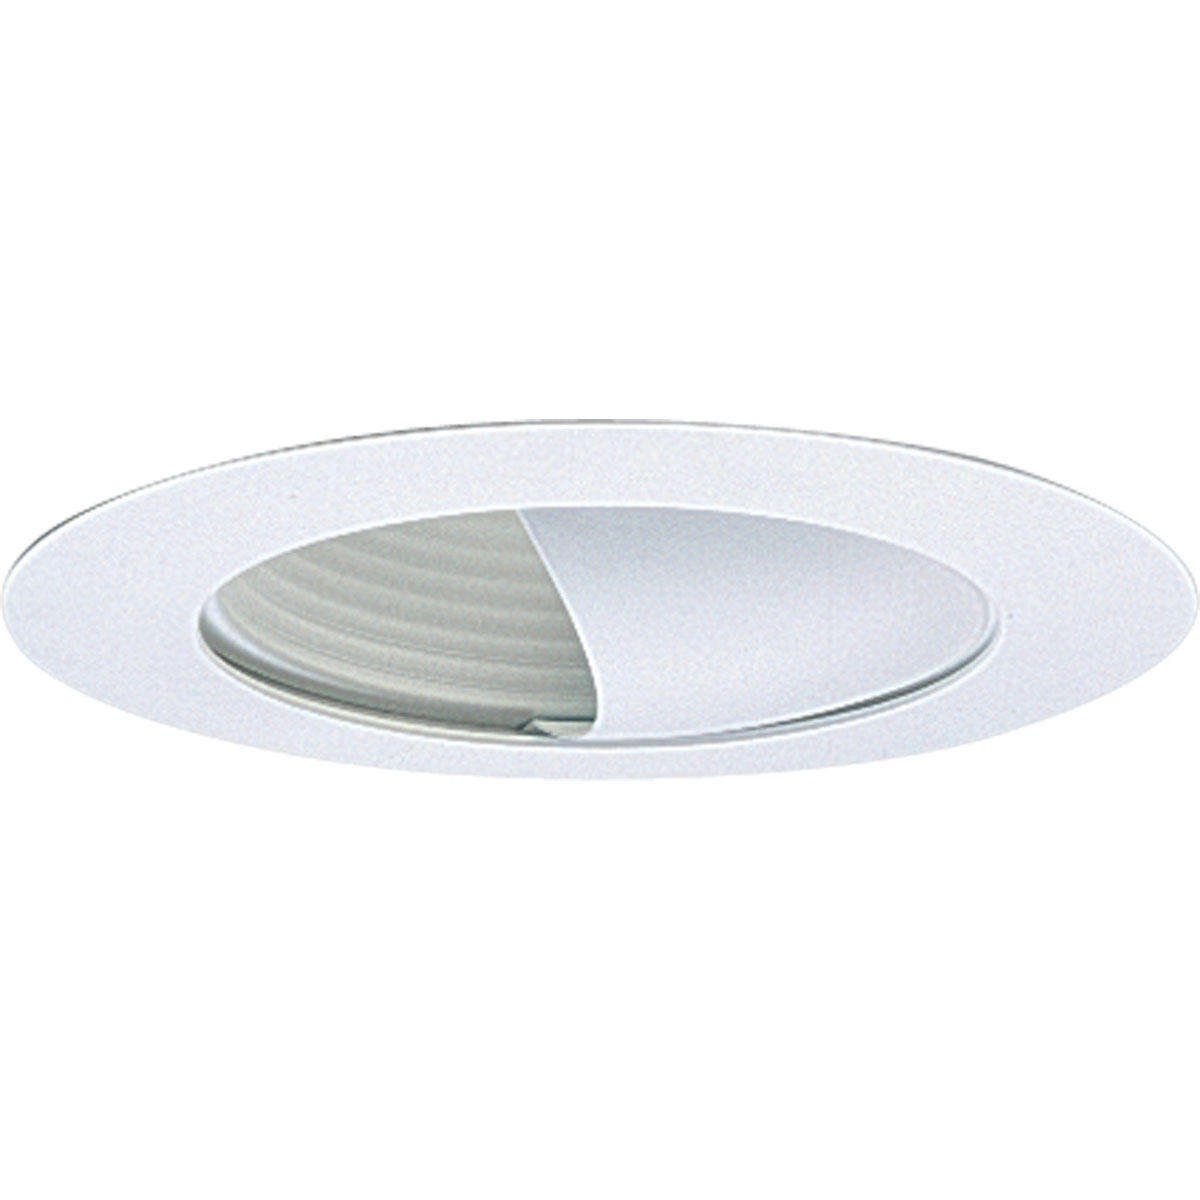 6 in Wall Washer in White finish and bright white powdered painted metal flange. 7-3/4 in outside diameter.